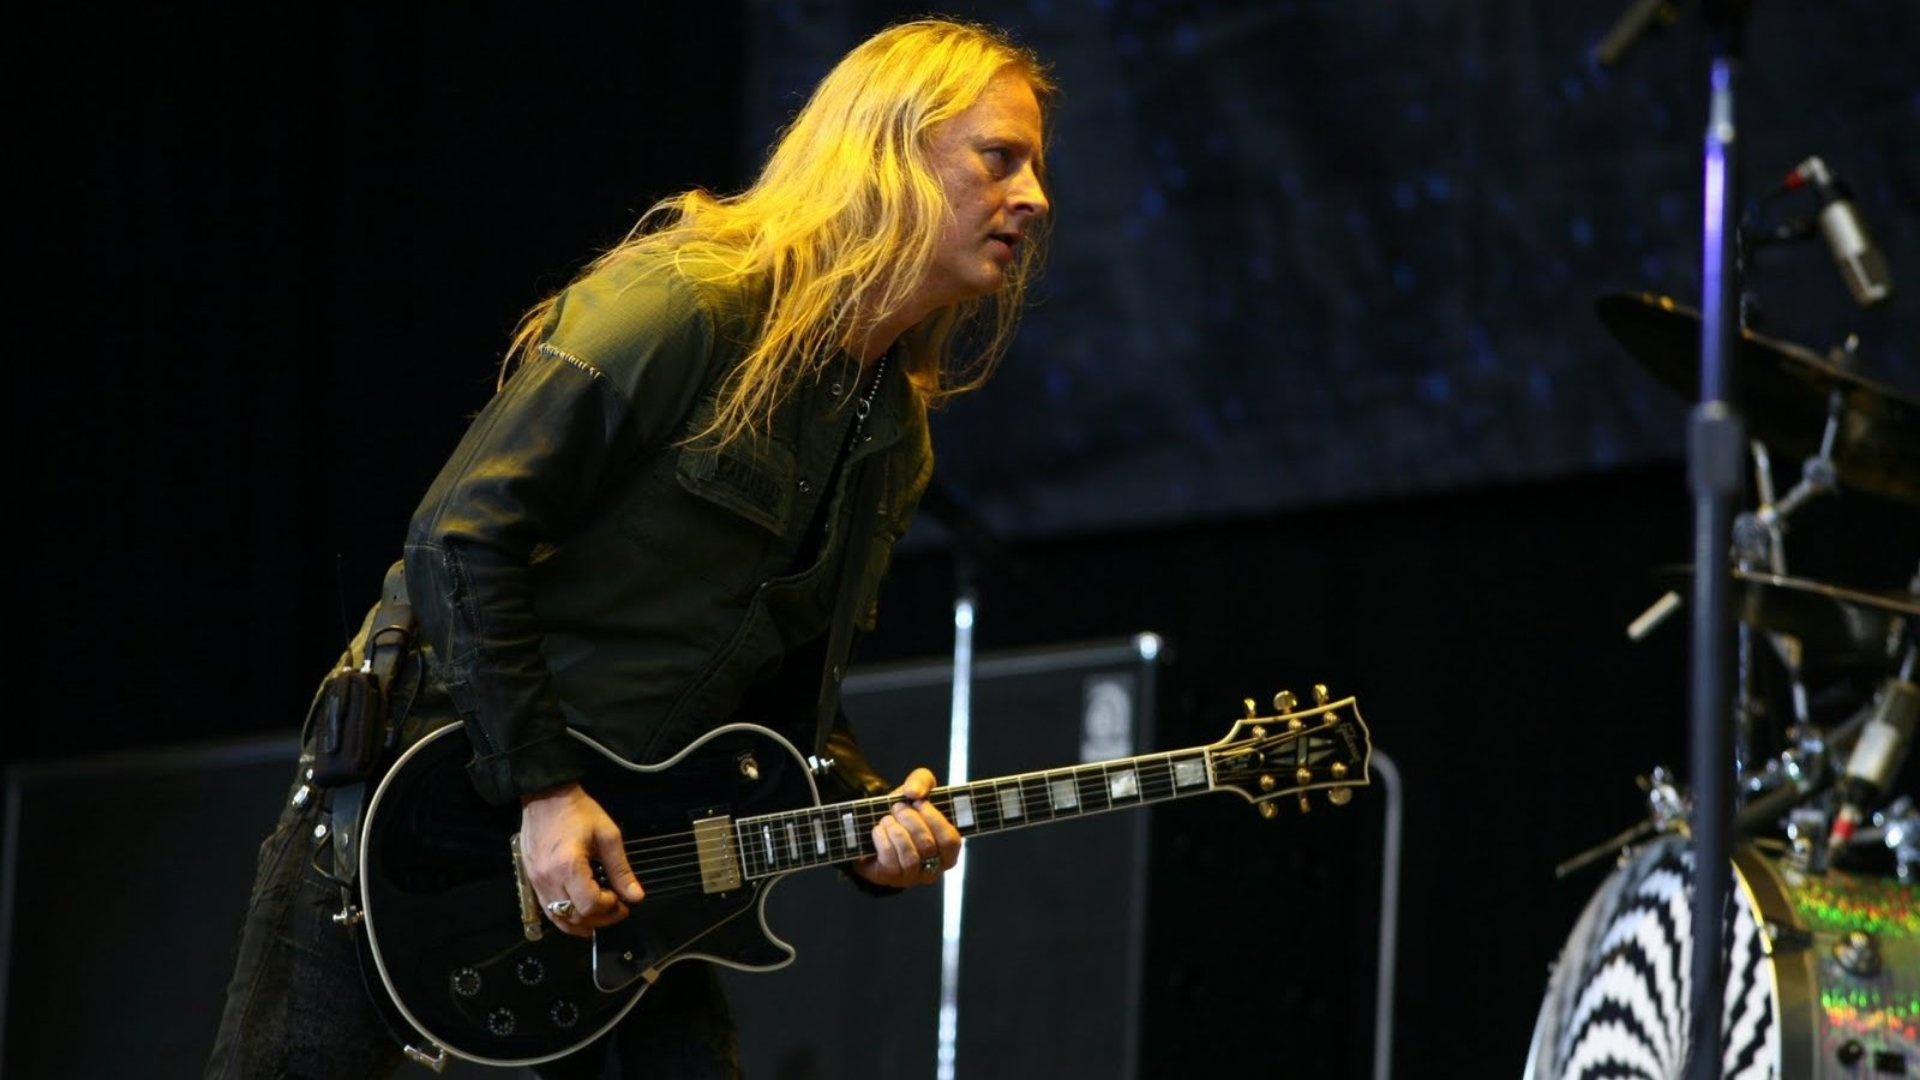 Jerry Cantrell, Musician, HQ wallpapers, 4K pictures, 1920x1080 Full HD Desktop